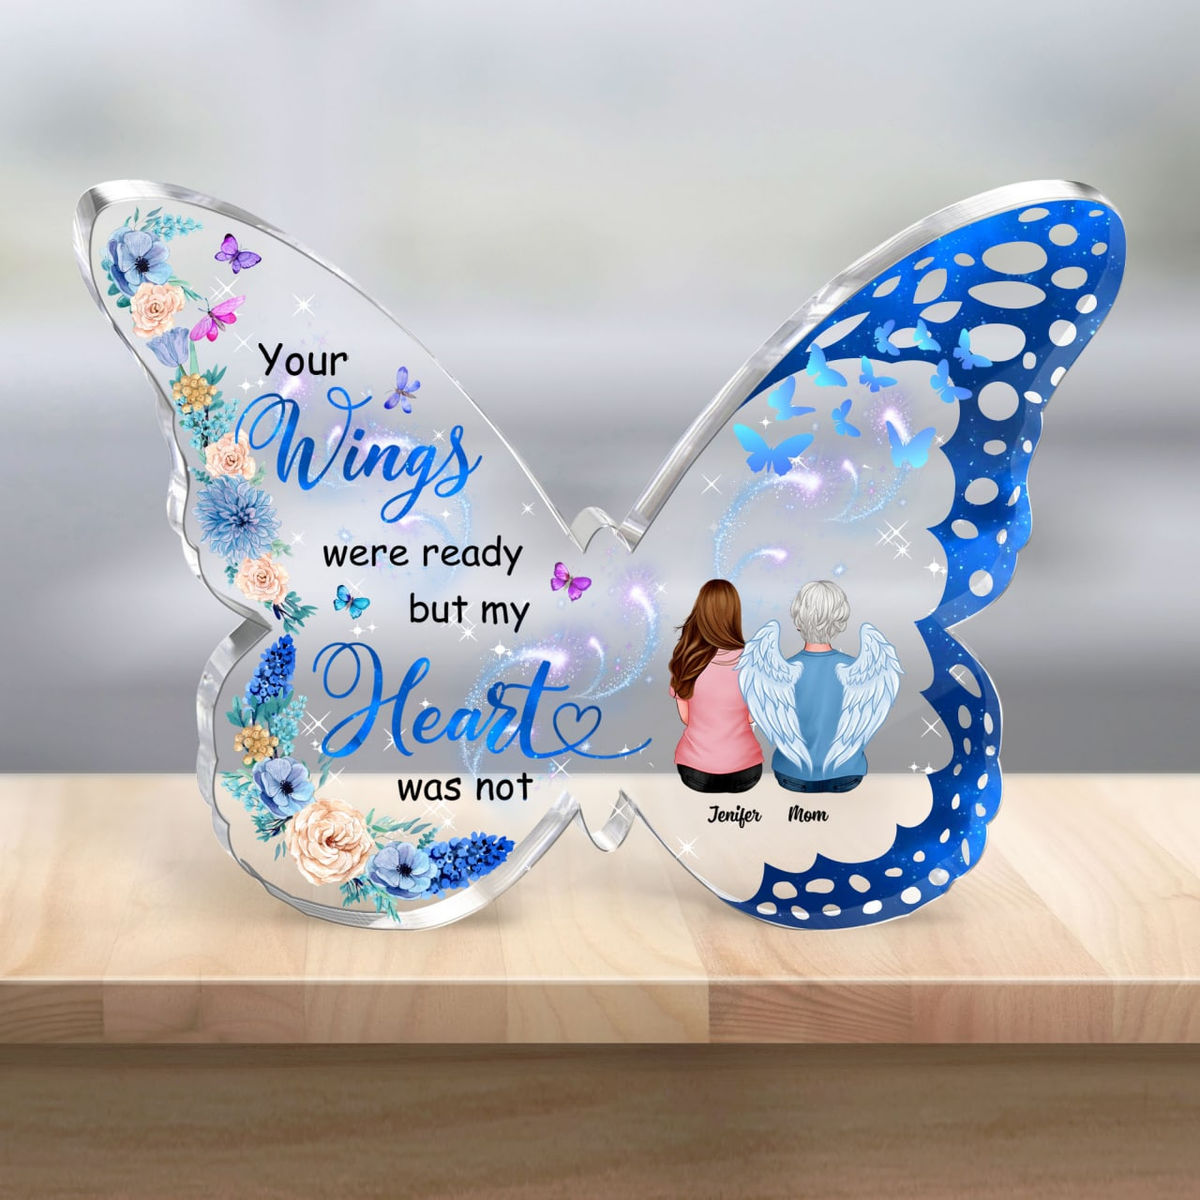 Transparent Plaque - Memorial Family - Your wings were ready but my heart was not (Custom Butterfly-Shaped Acrylic Keepsake)